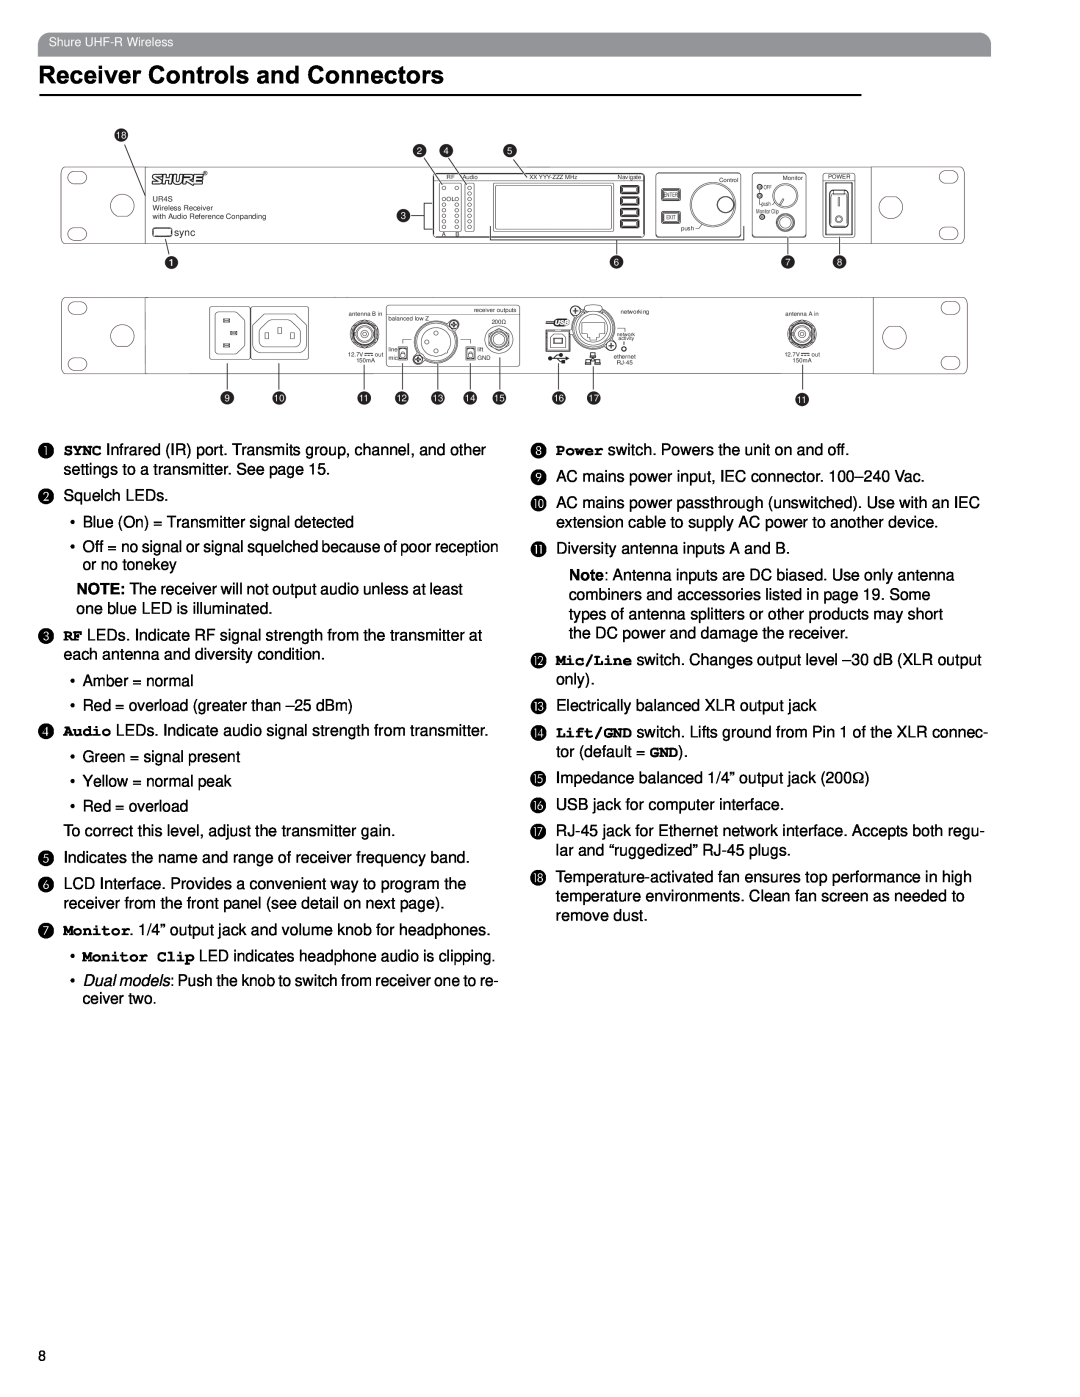 Shure UHF manual Receiver Controls and Connectors 